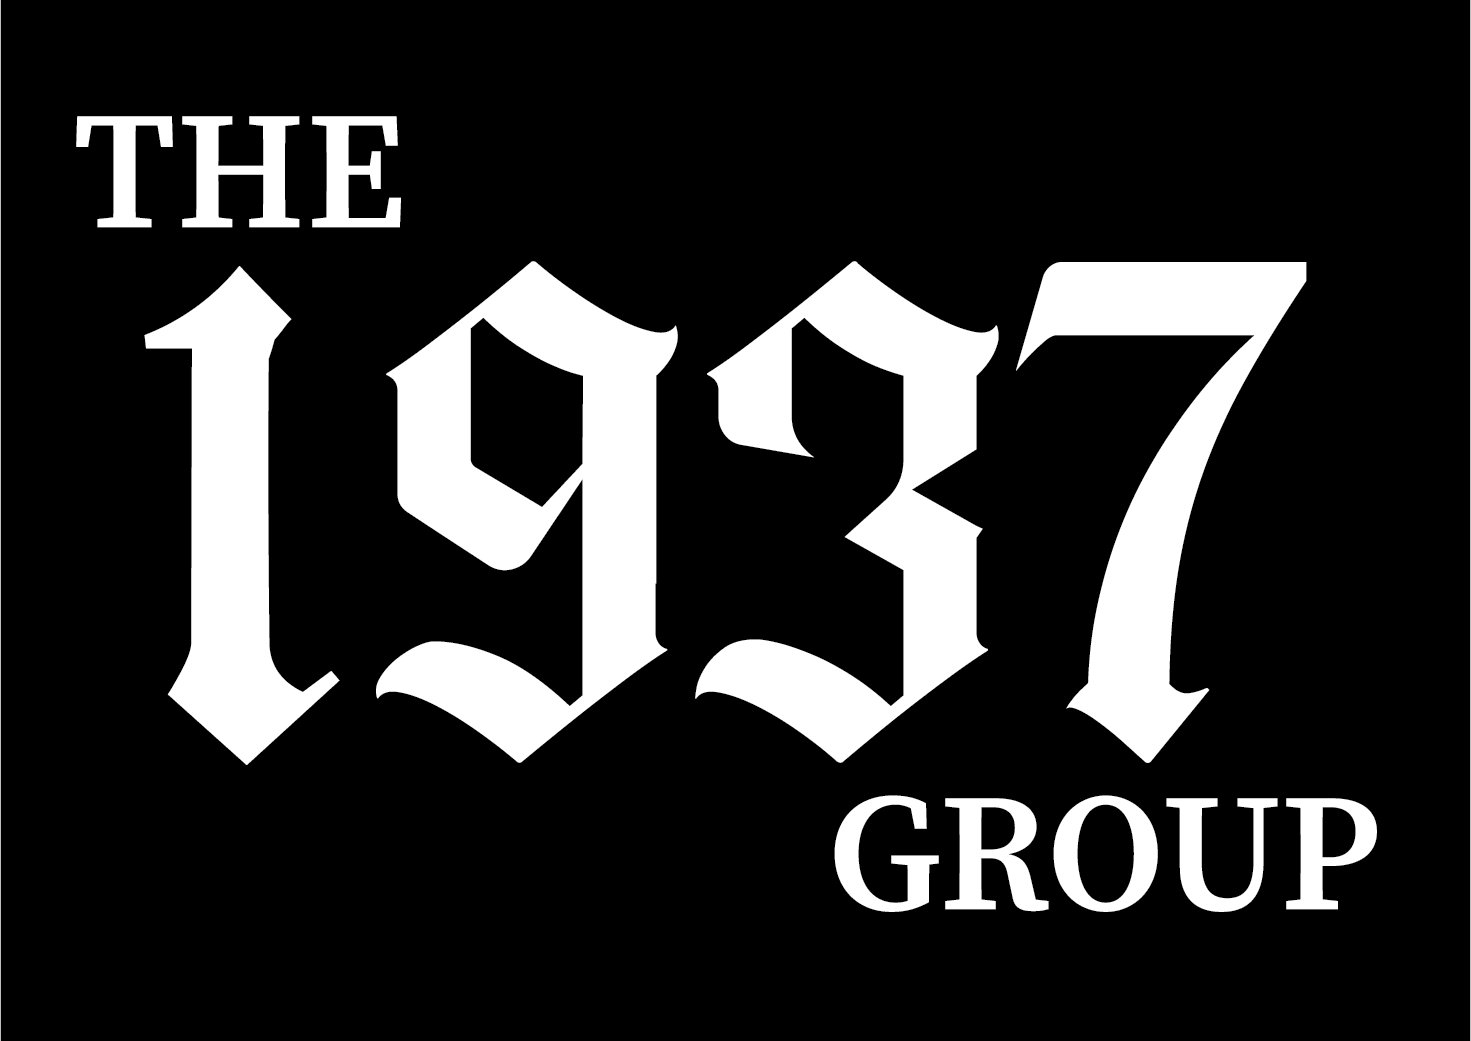 The1937GroupLogoWhite.png